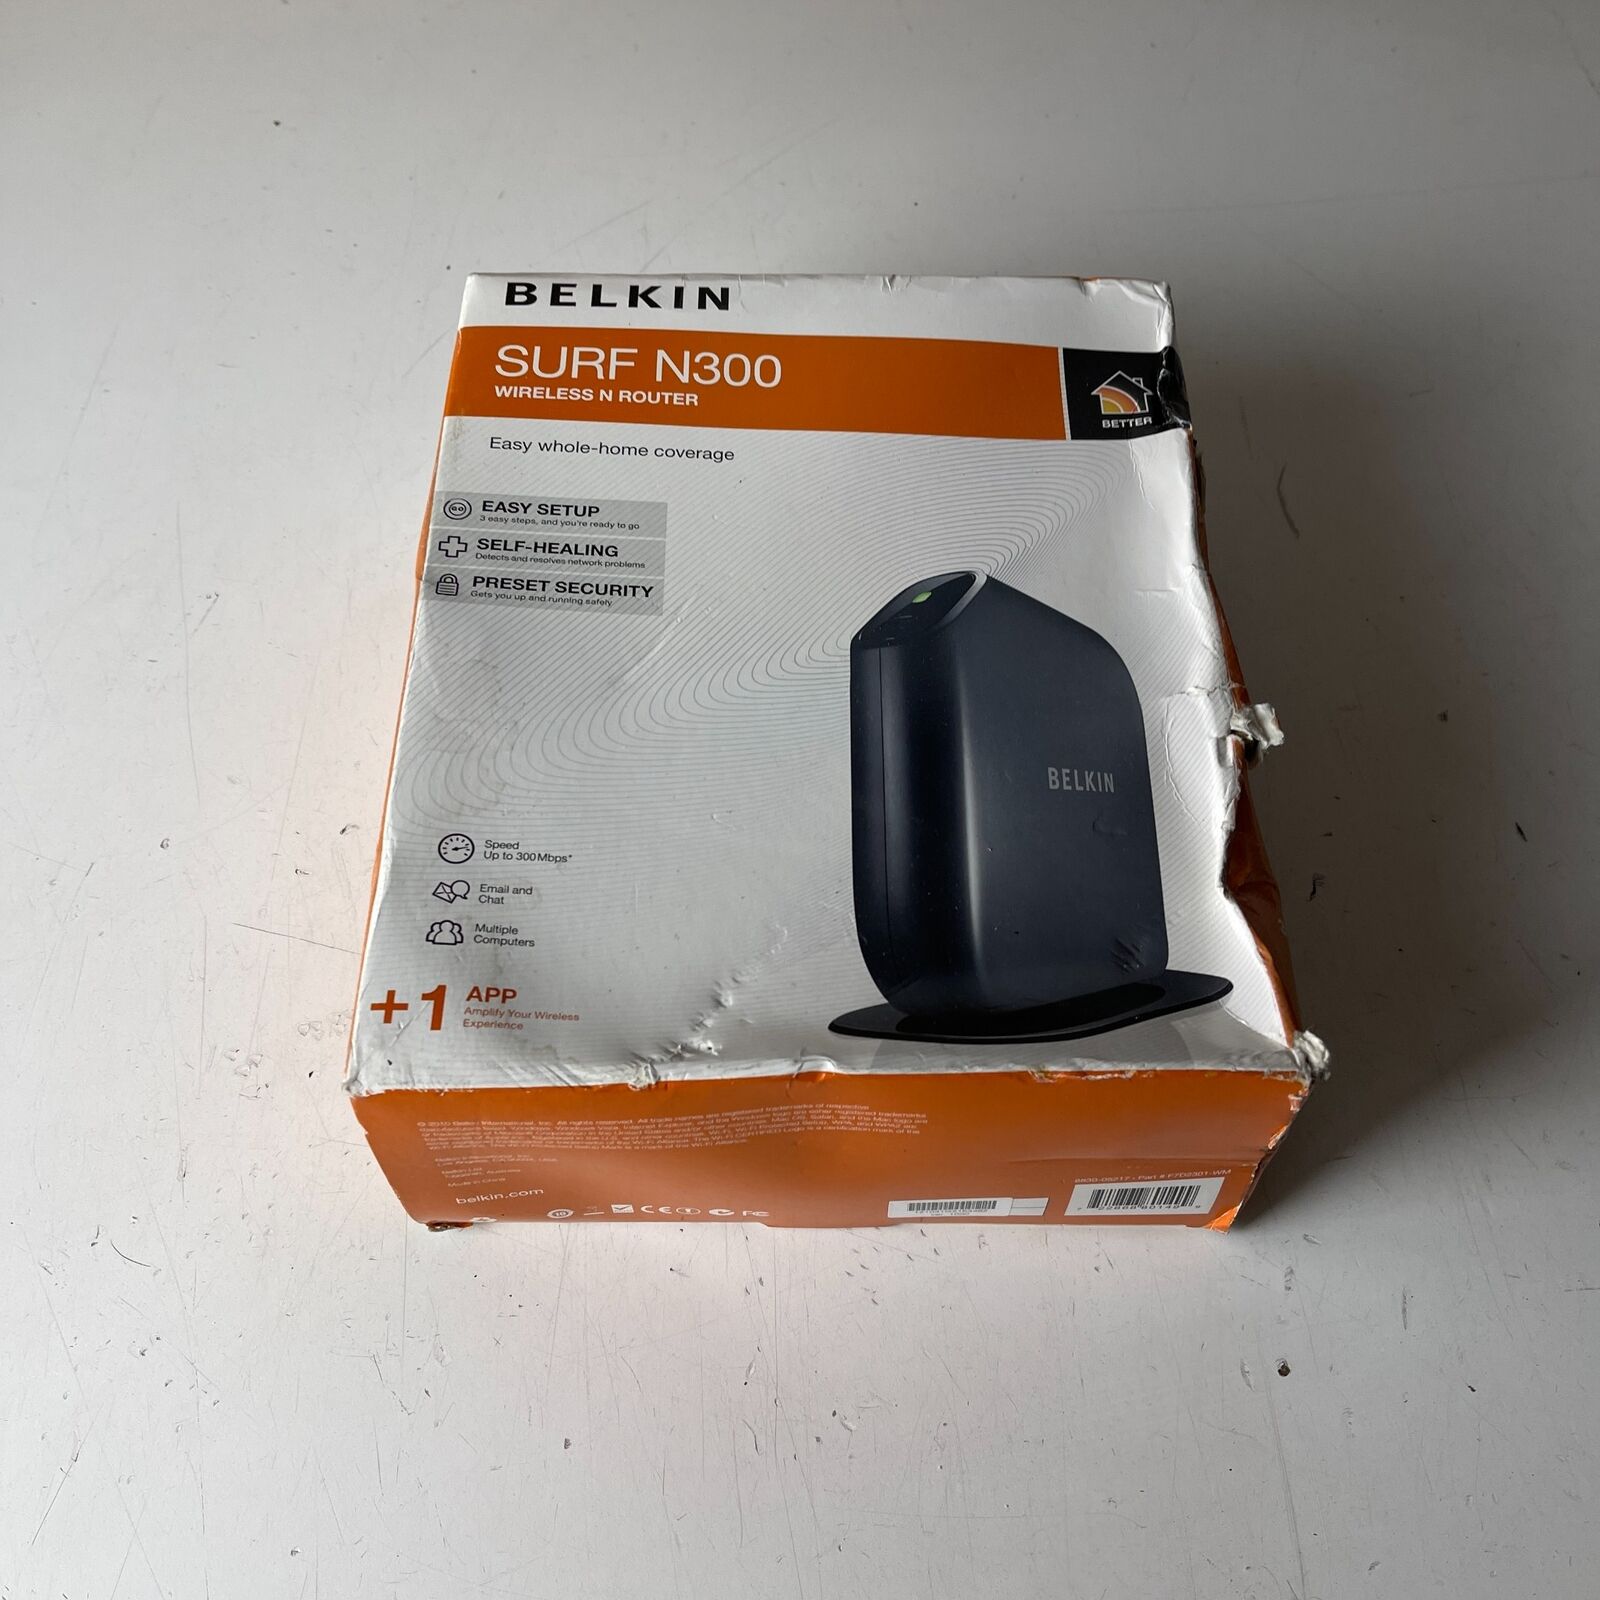 Belkin Share N300 F7D2301 Black 4-Port 300Mbps 2.4 GHz Wireless-N MIMO Router